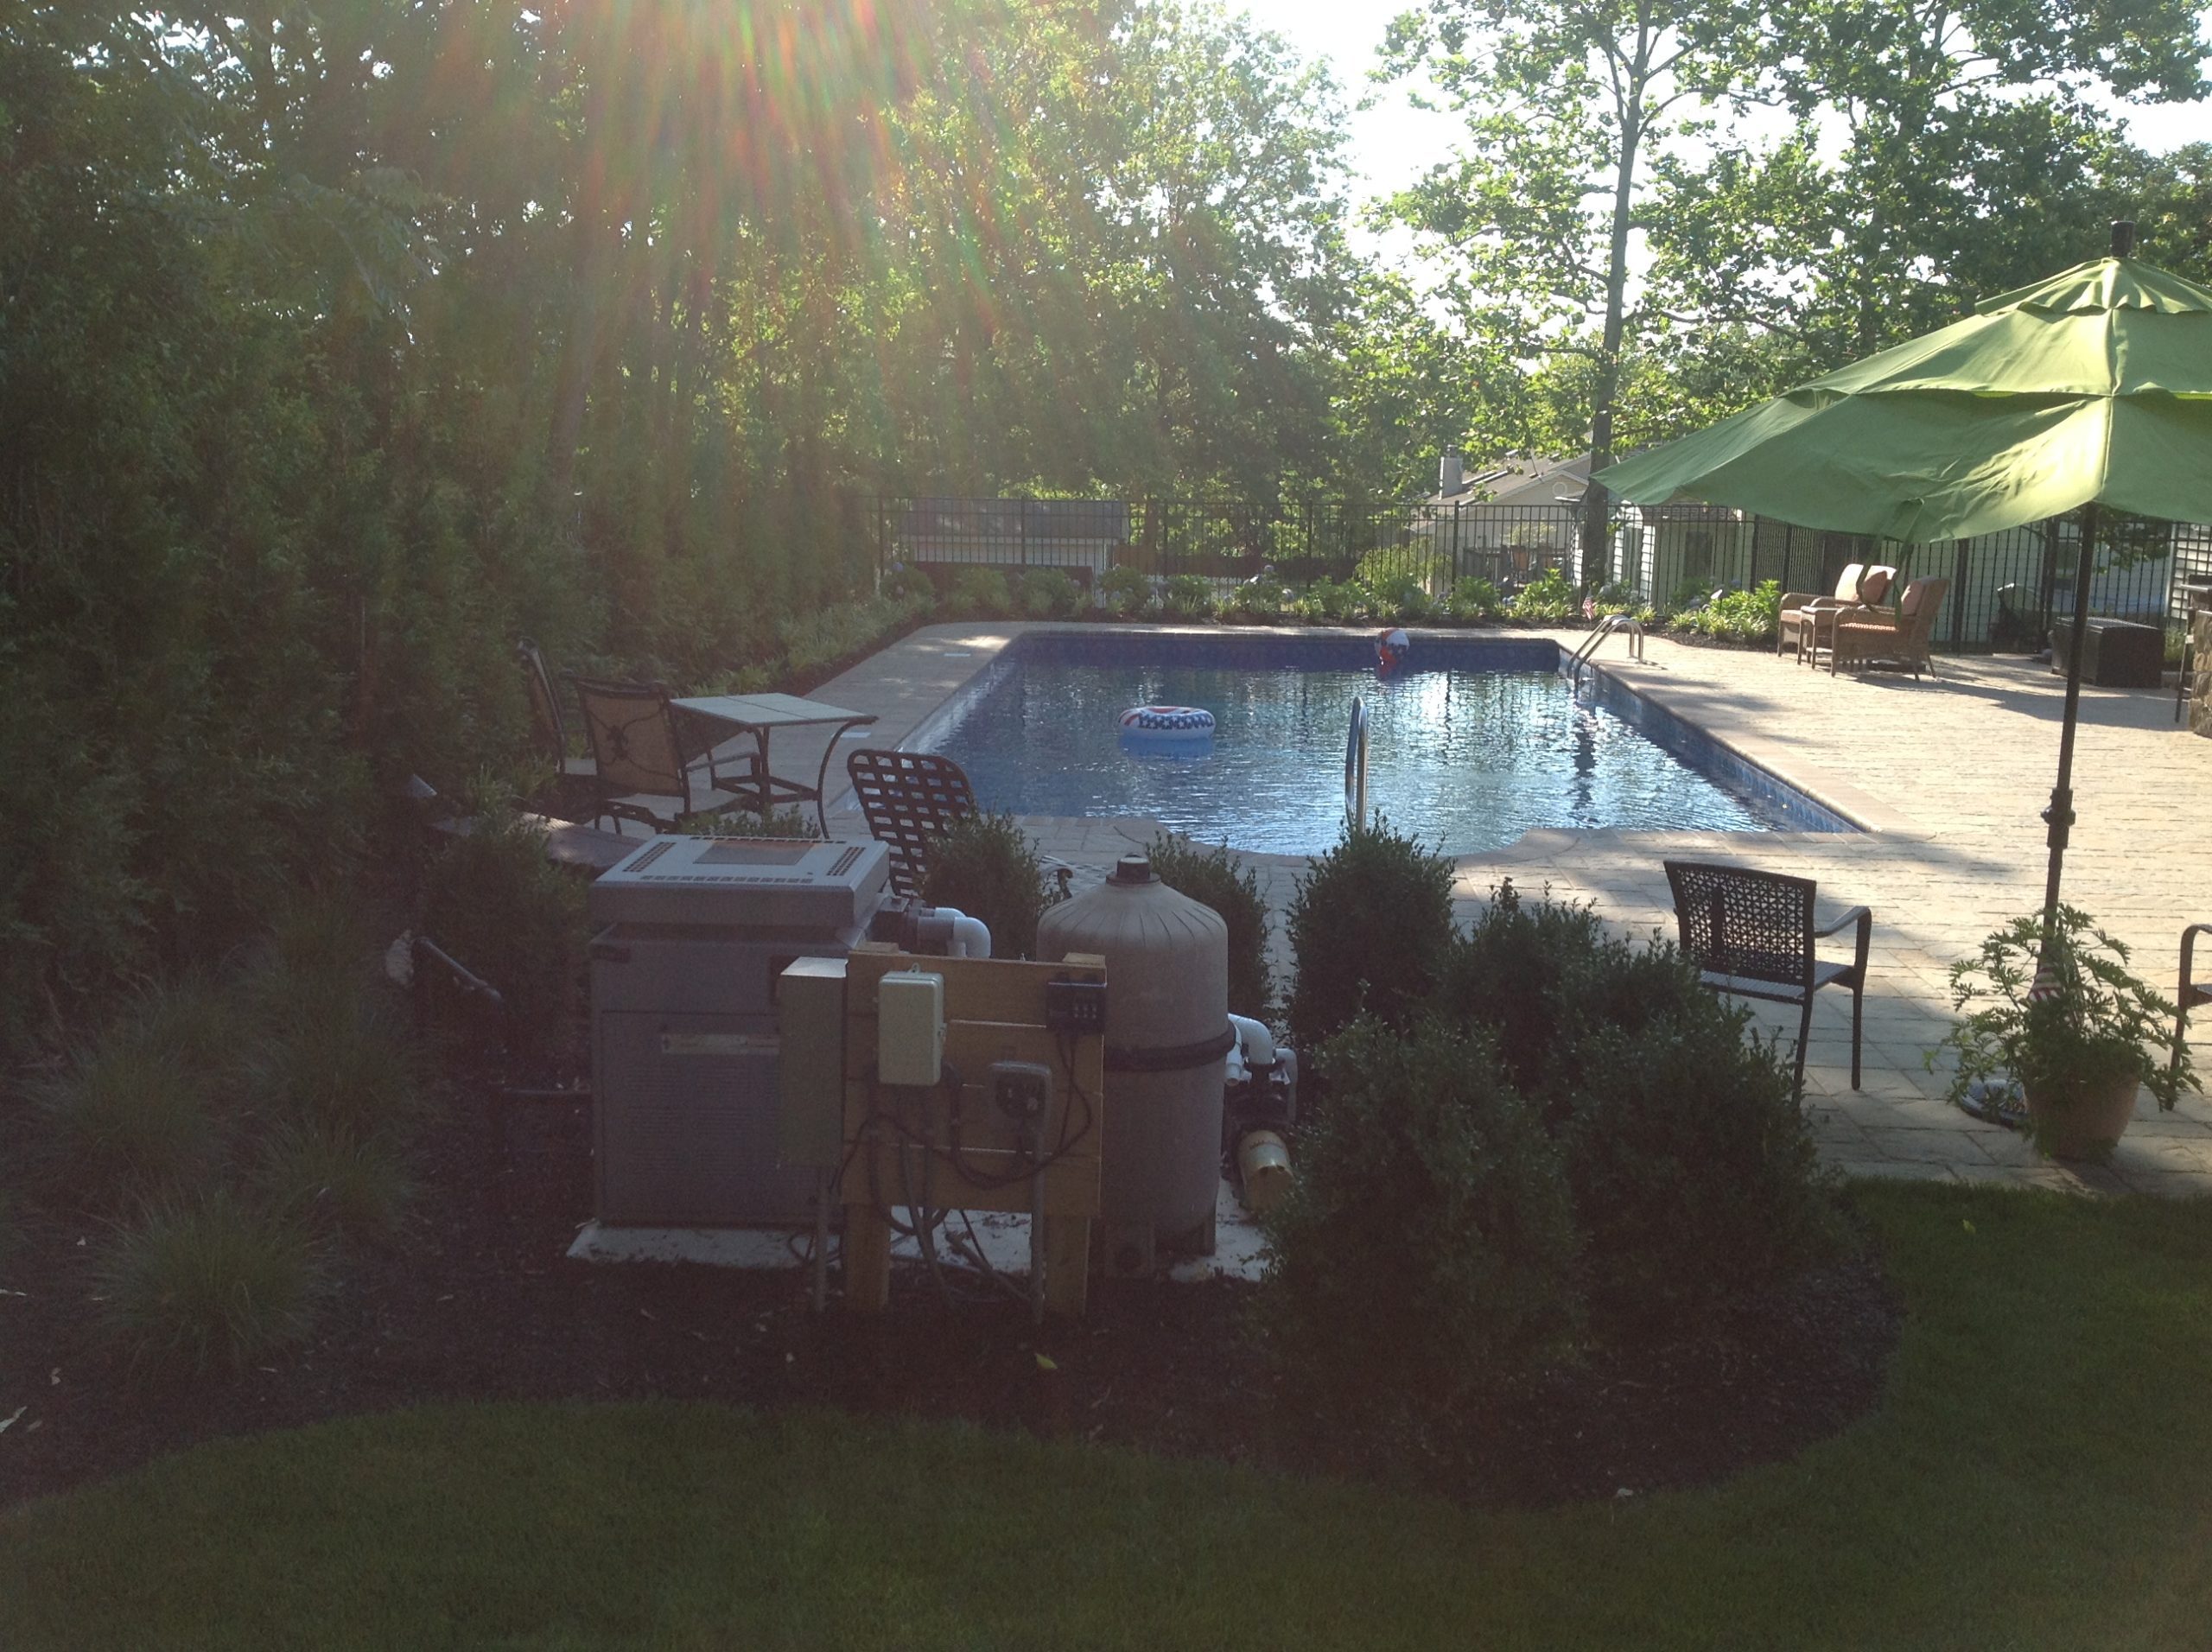 Poolscape - Before